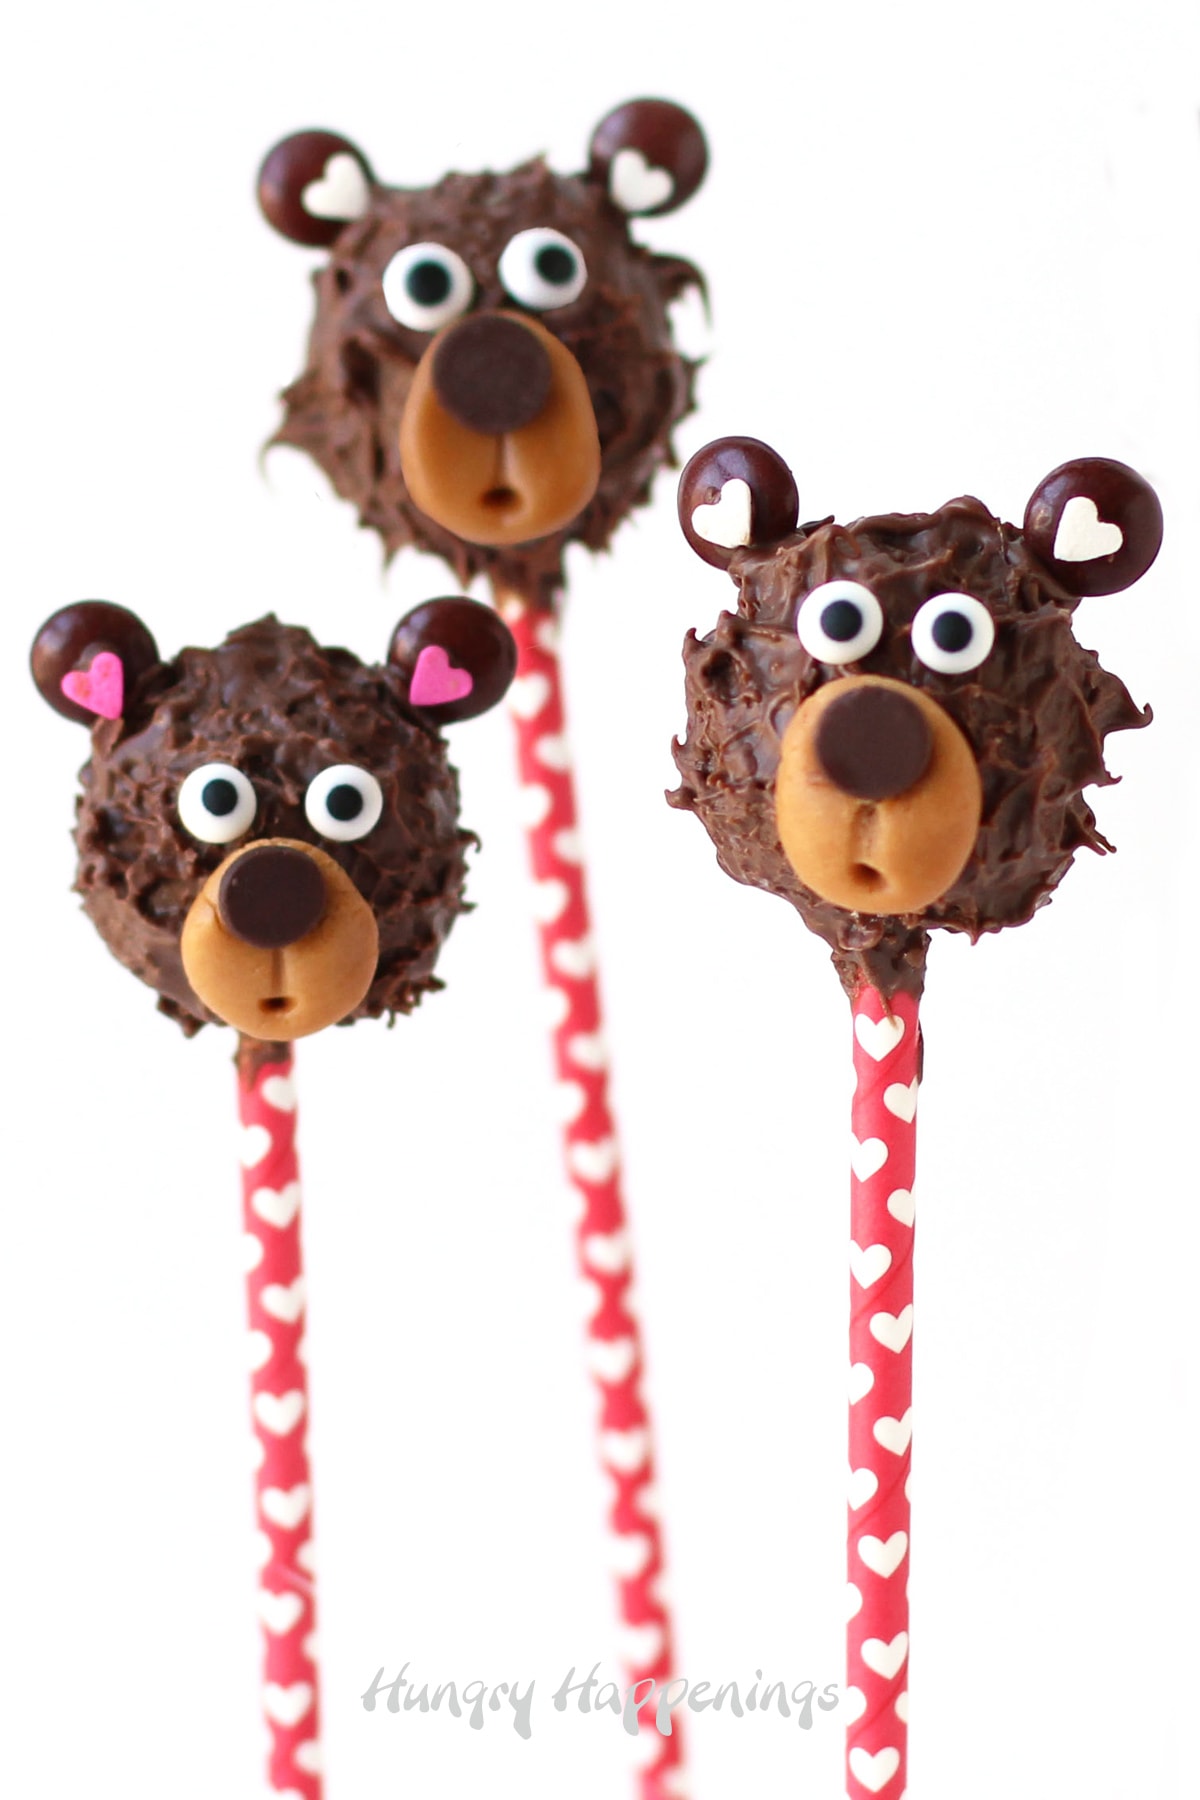 Chocolate peanut butter fudge bear pops for Valentine's Day